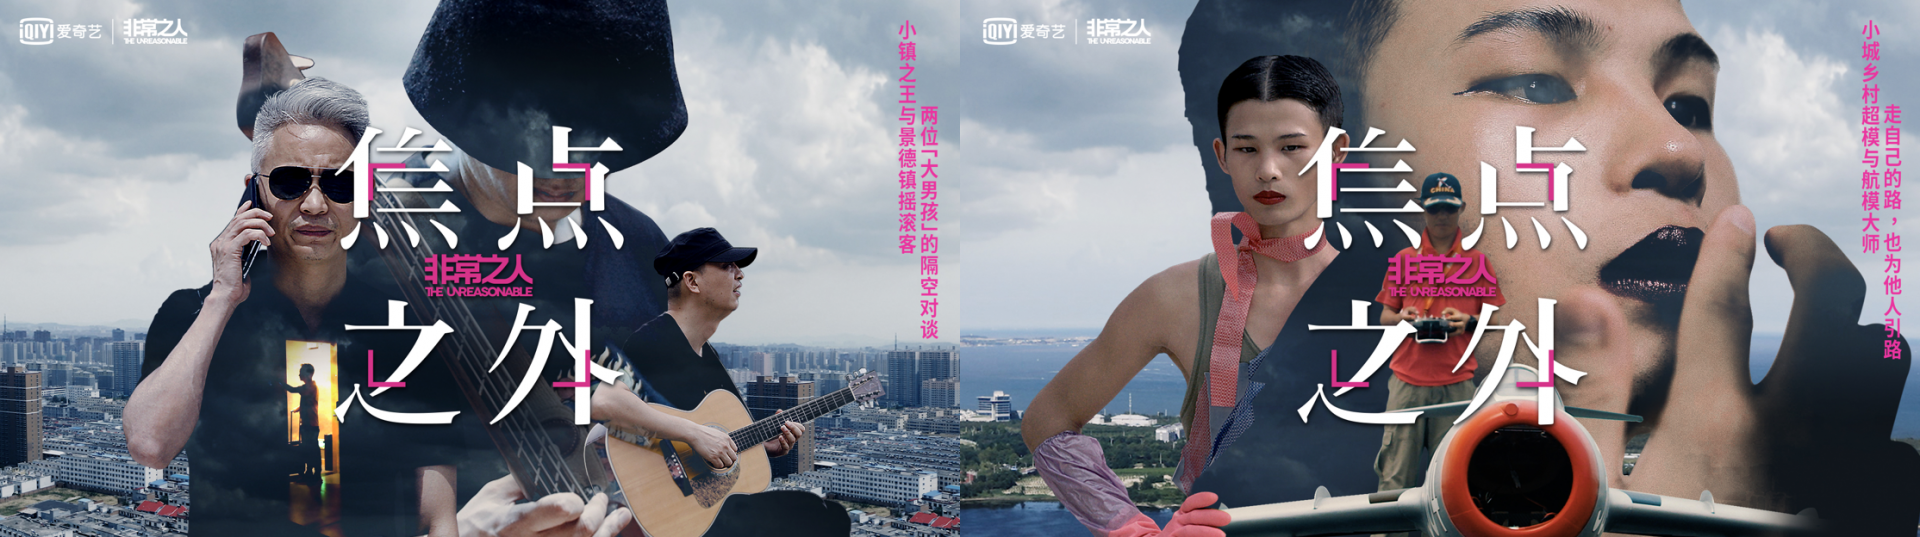 IQIYI PARTNERS WITH THE UNREASONABLE TO LAUNCH NEW SERIES OF DOCUMENTARIES